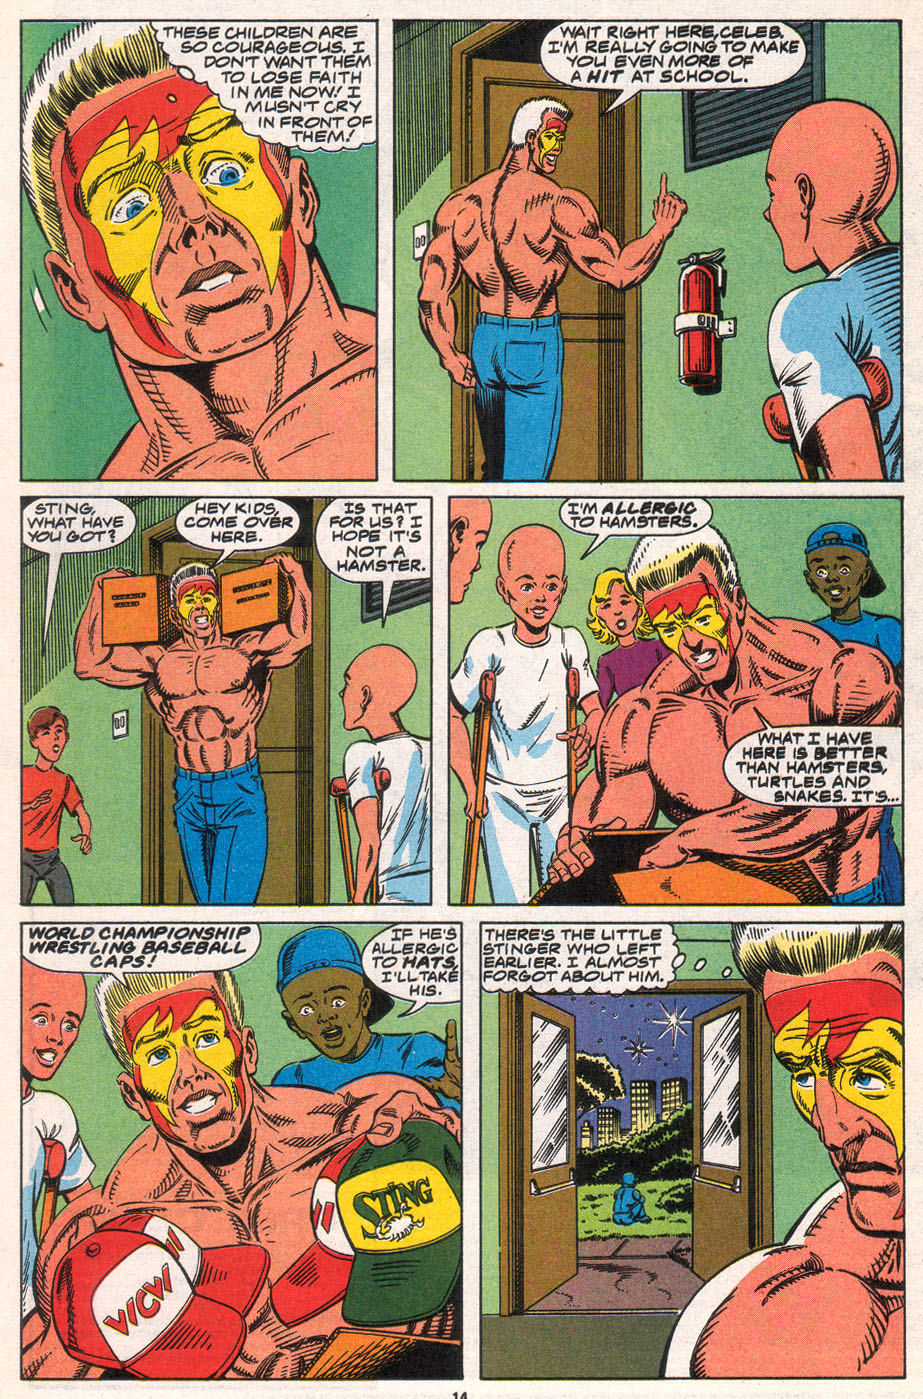 Read online WCW World Championship Wrestling comic -  Issue #8 - 14